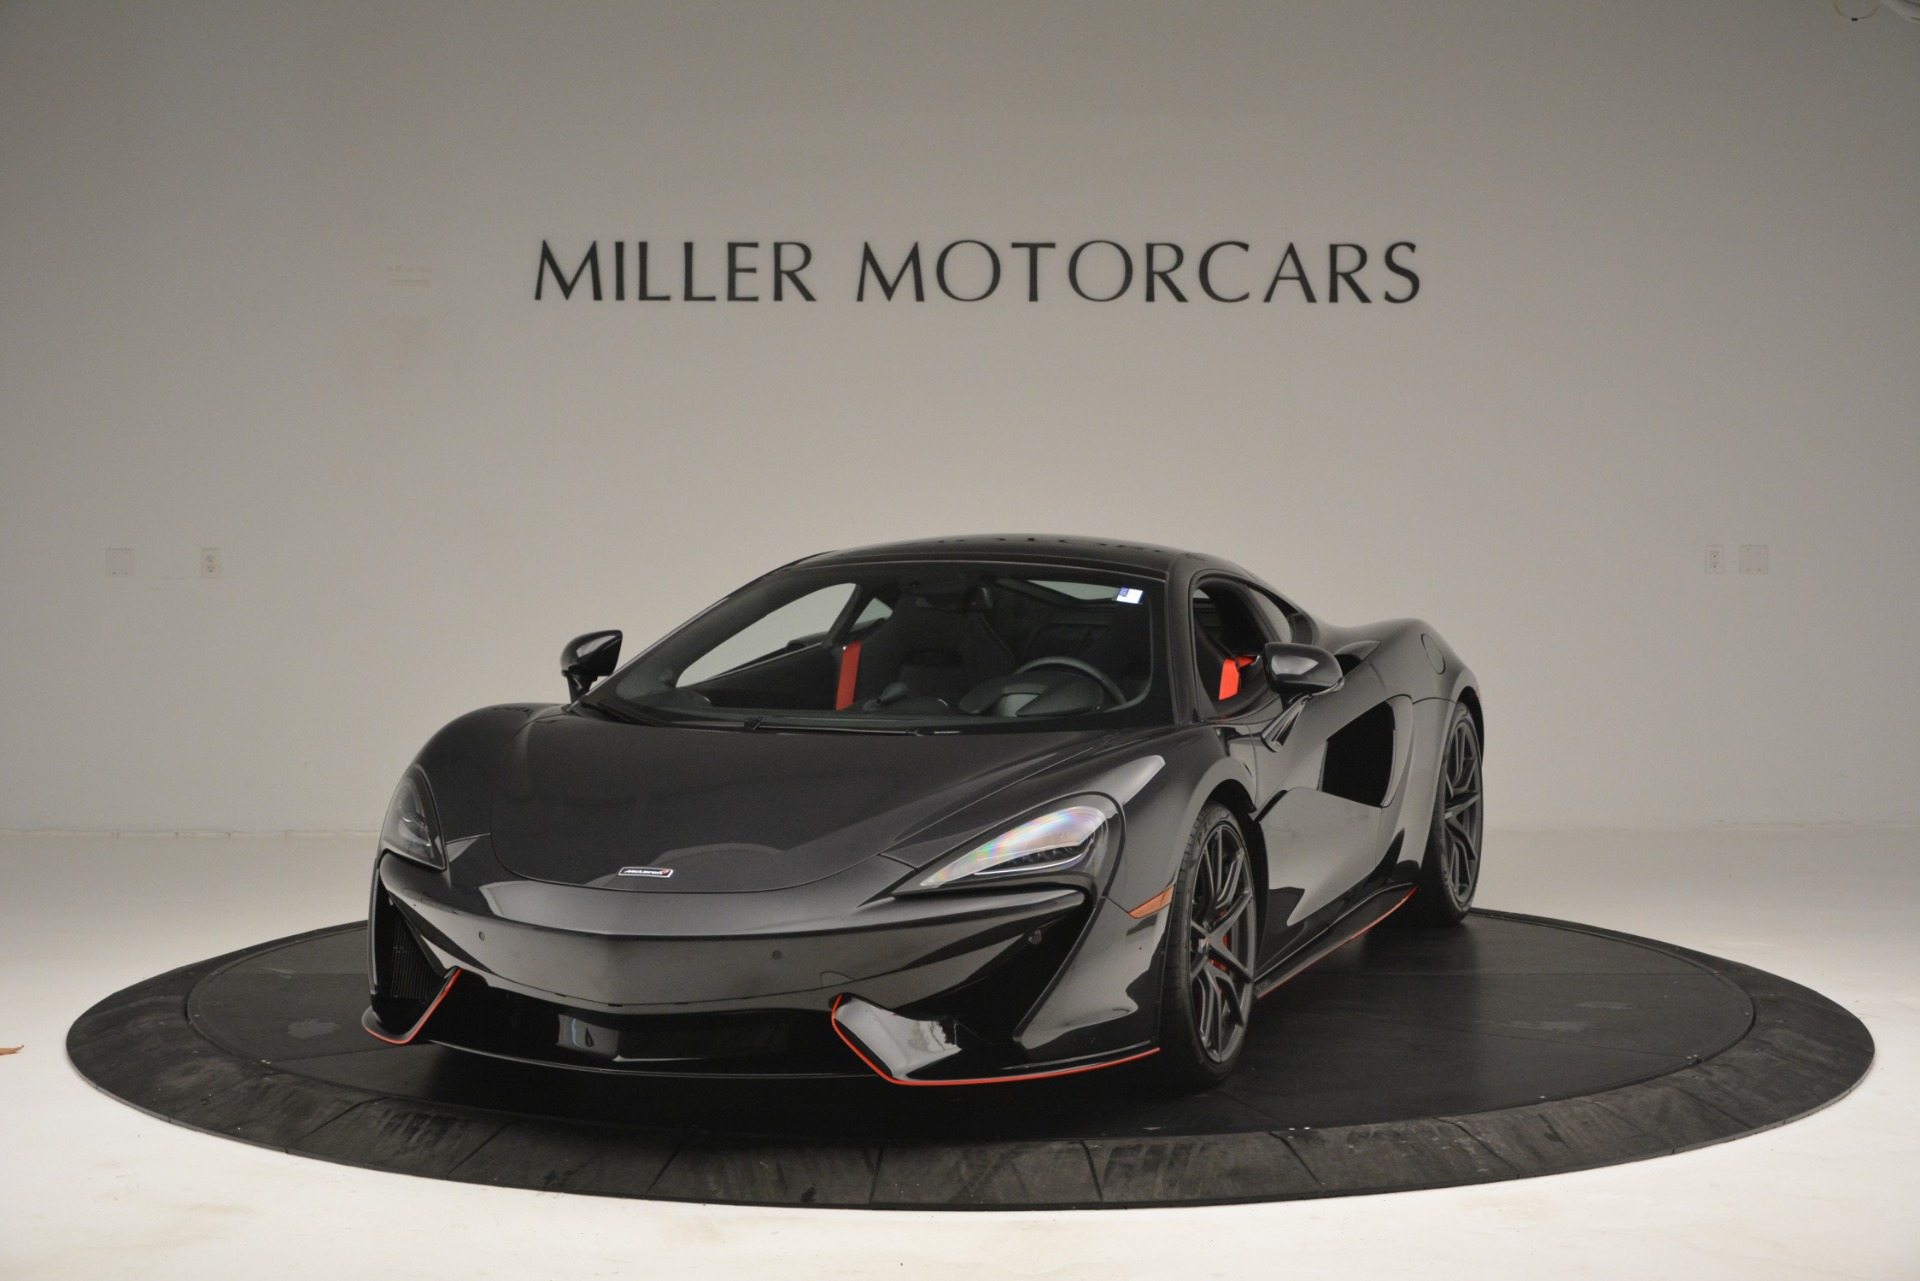 Used 2018 McLaren 570GT for sale Sold at Pagani of Greenwich in Greenwich CT 06830 1